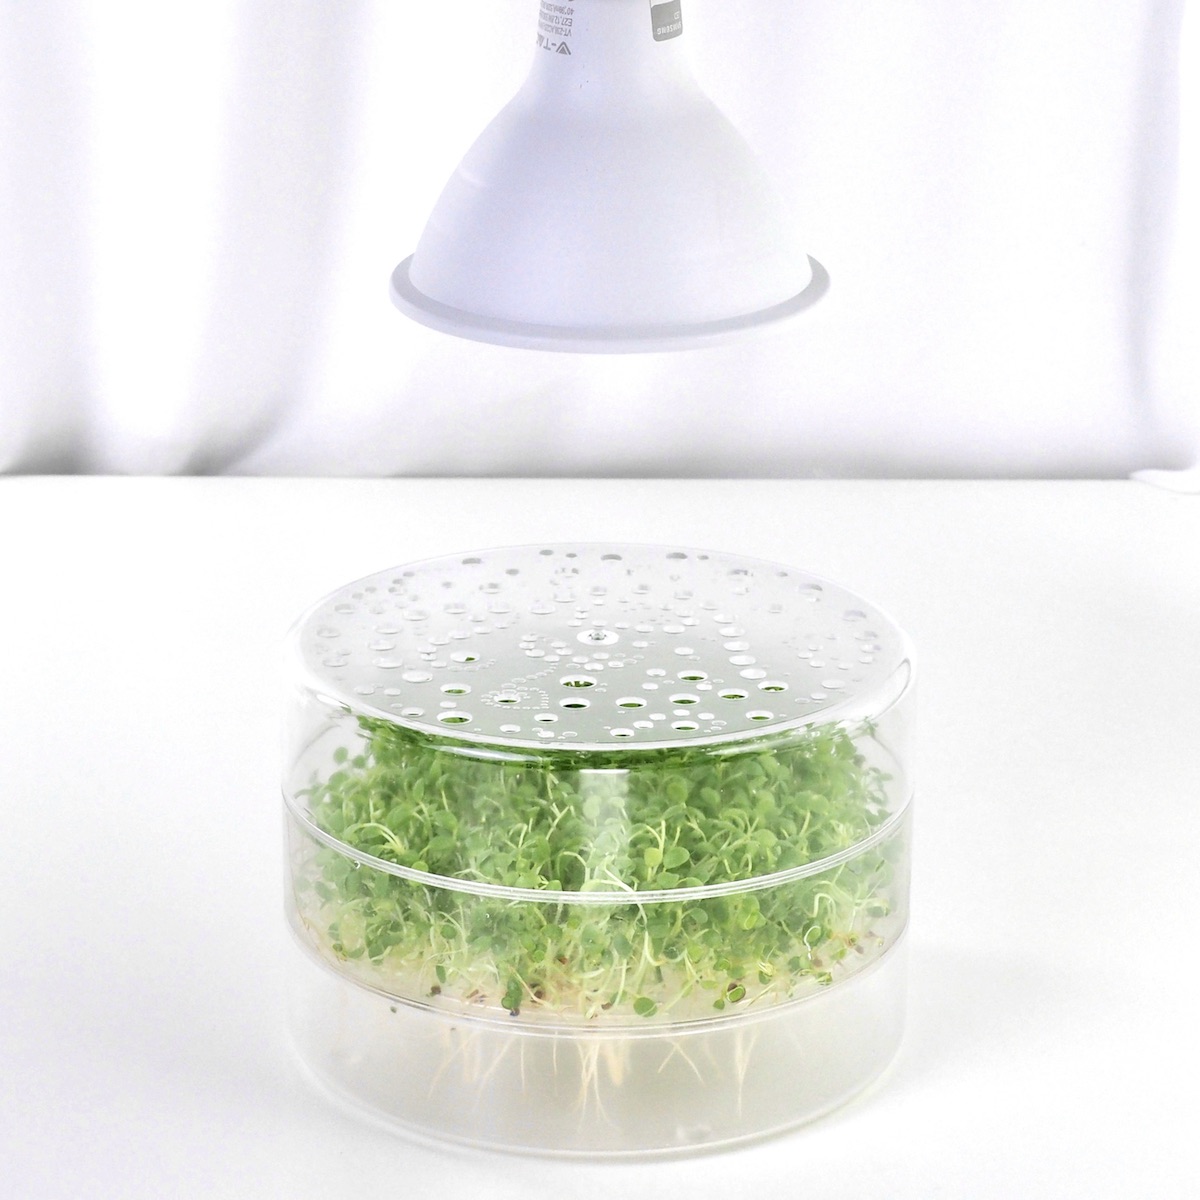 LED light for Microgreens and sprouts in SproutPearl sprouter